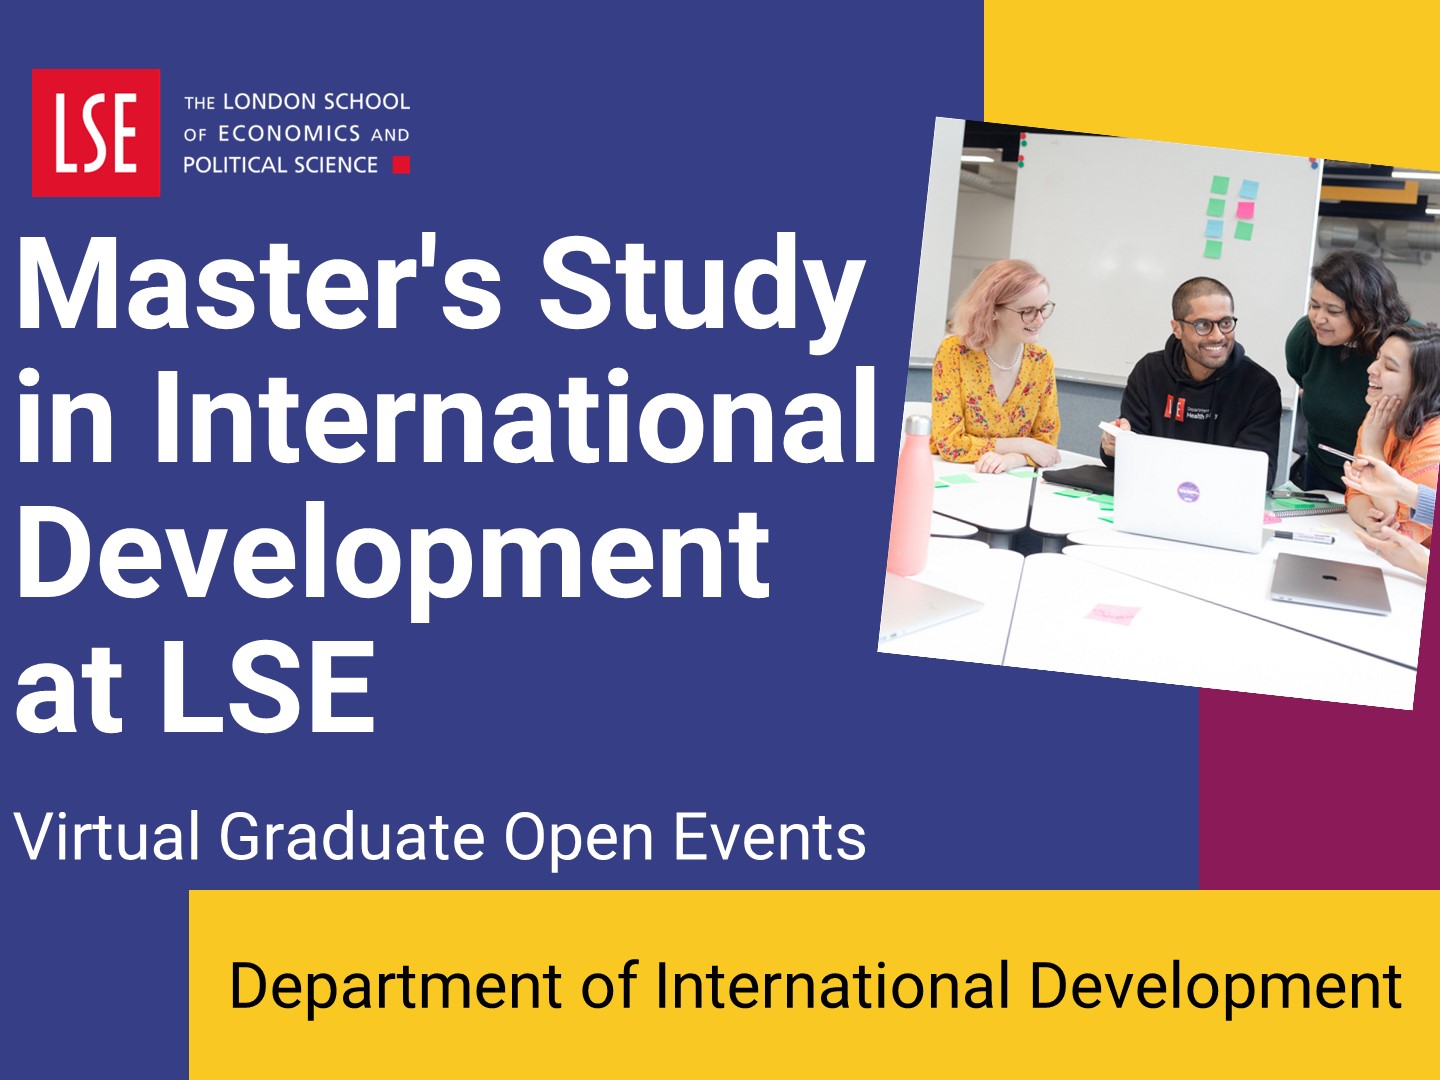 Introduction to master's study in International Development at LSE